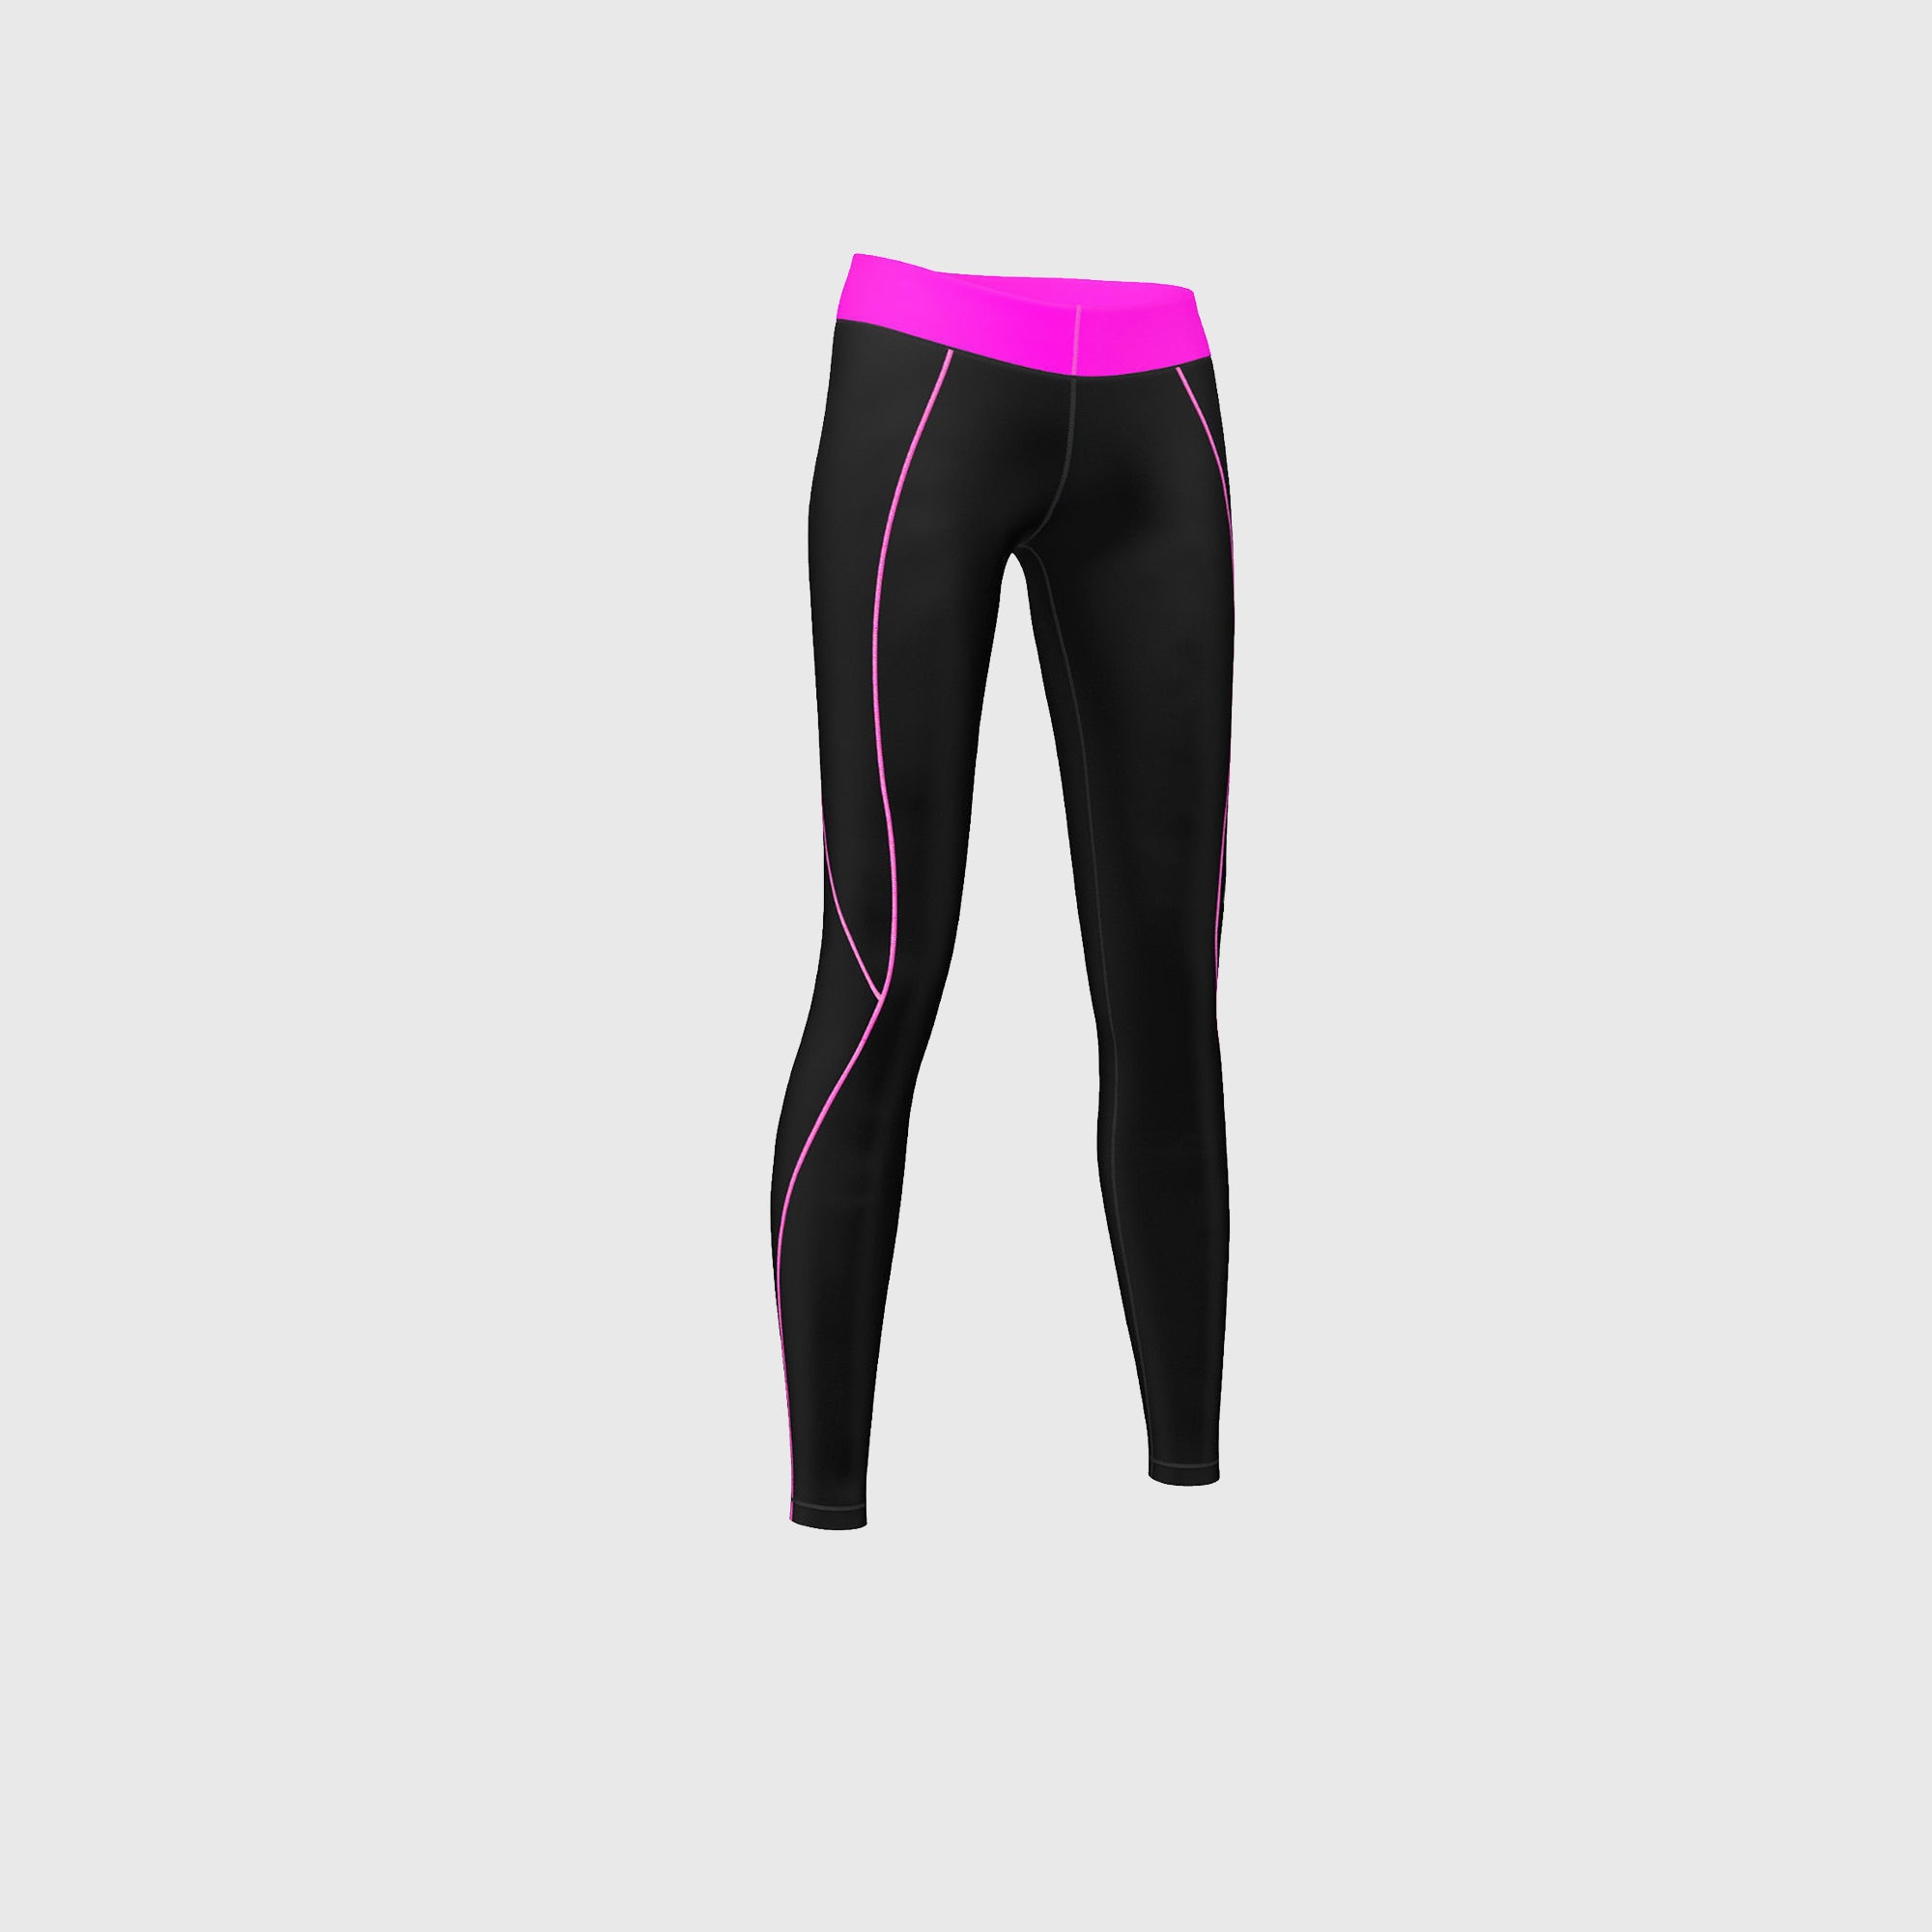 Fdx Black & Pink Compression Tights Leggings Gym Workout Running Athletic Yoga Elastic Waistband Stretchable Breathable Training Jogging Pants - Monarch